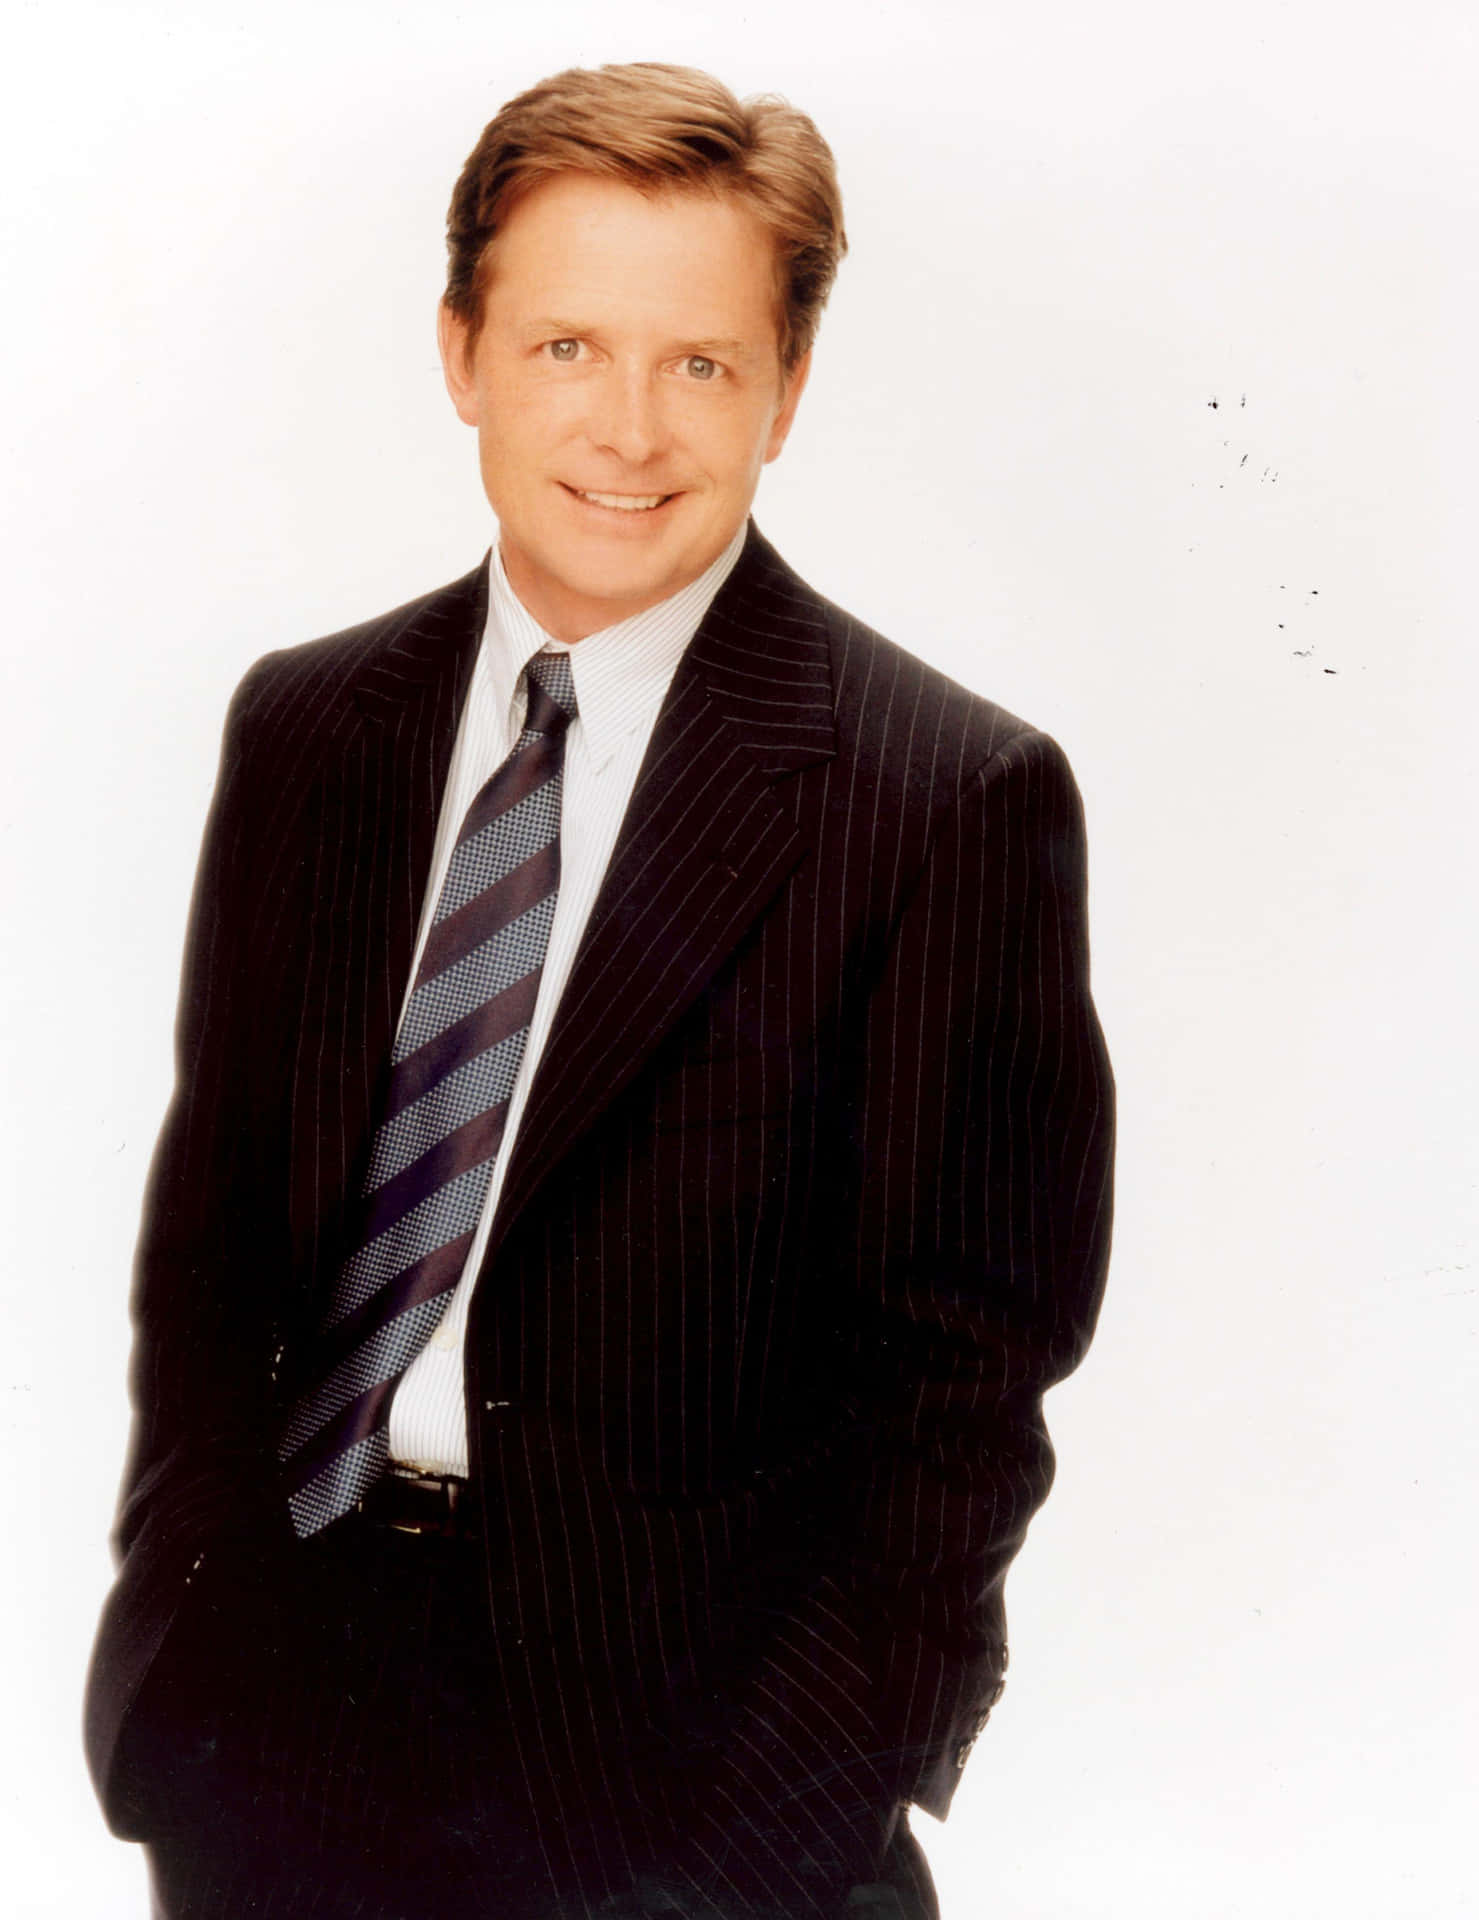 The Enigmatic Smile Of Michael J. Fox Background